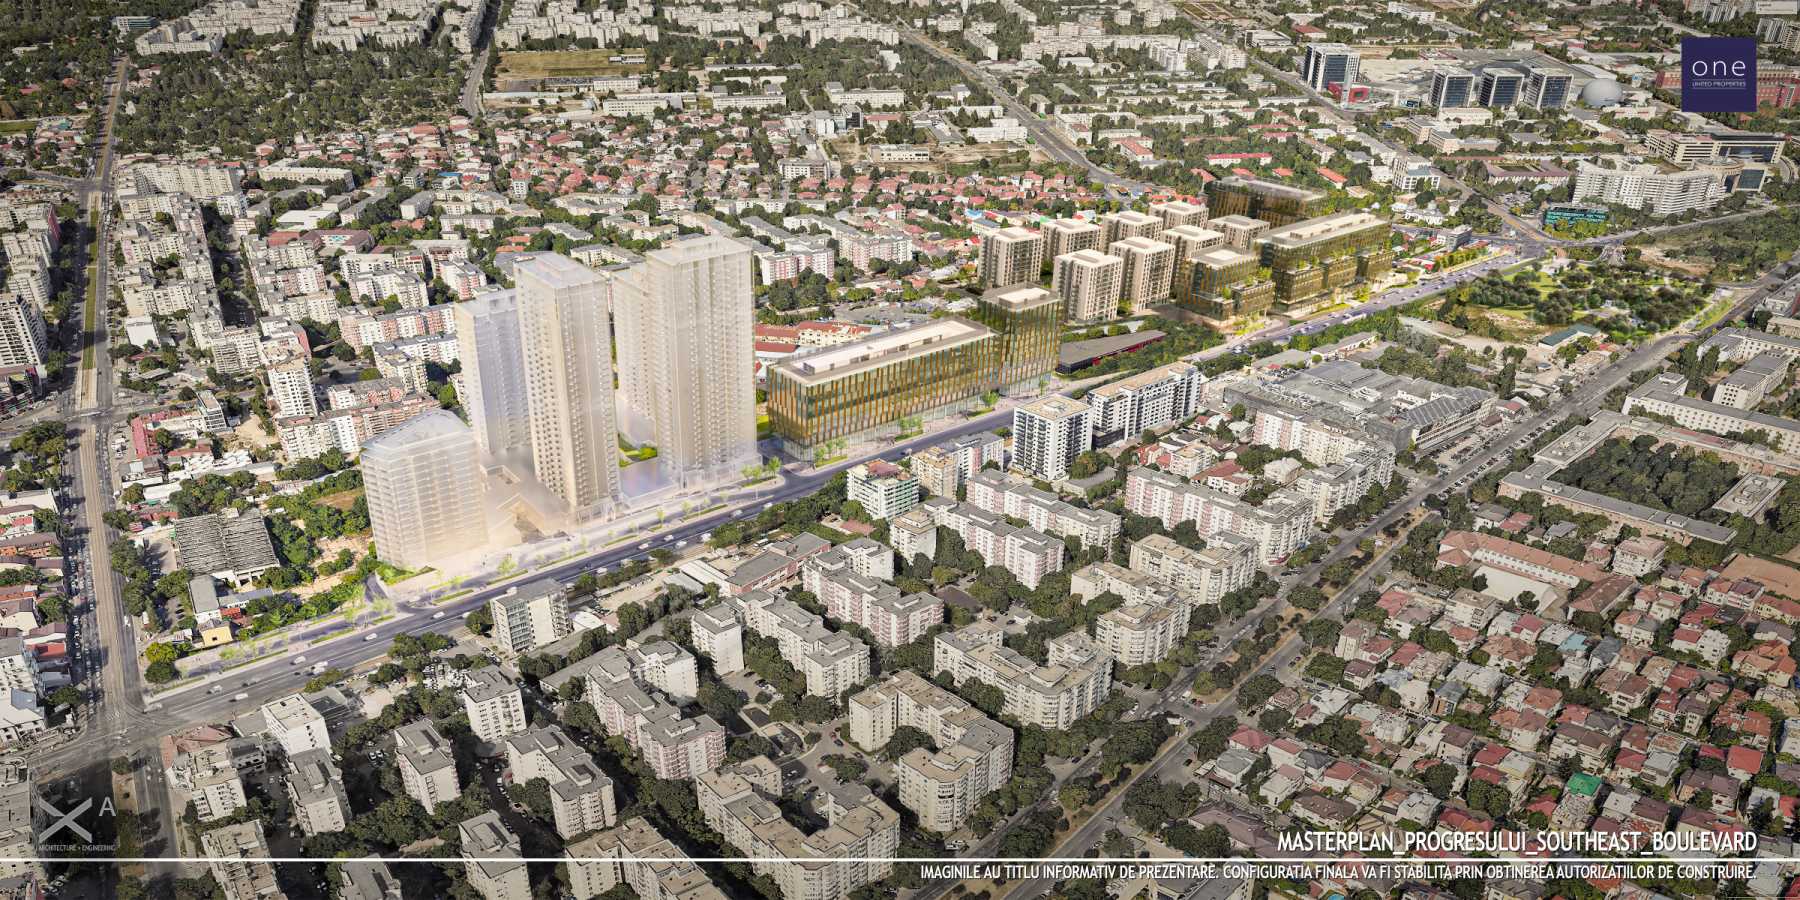 One United Properties acquires 5 hectares of land for a new mixed-use development, One Cotroceni Towers